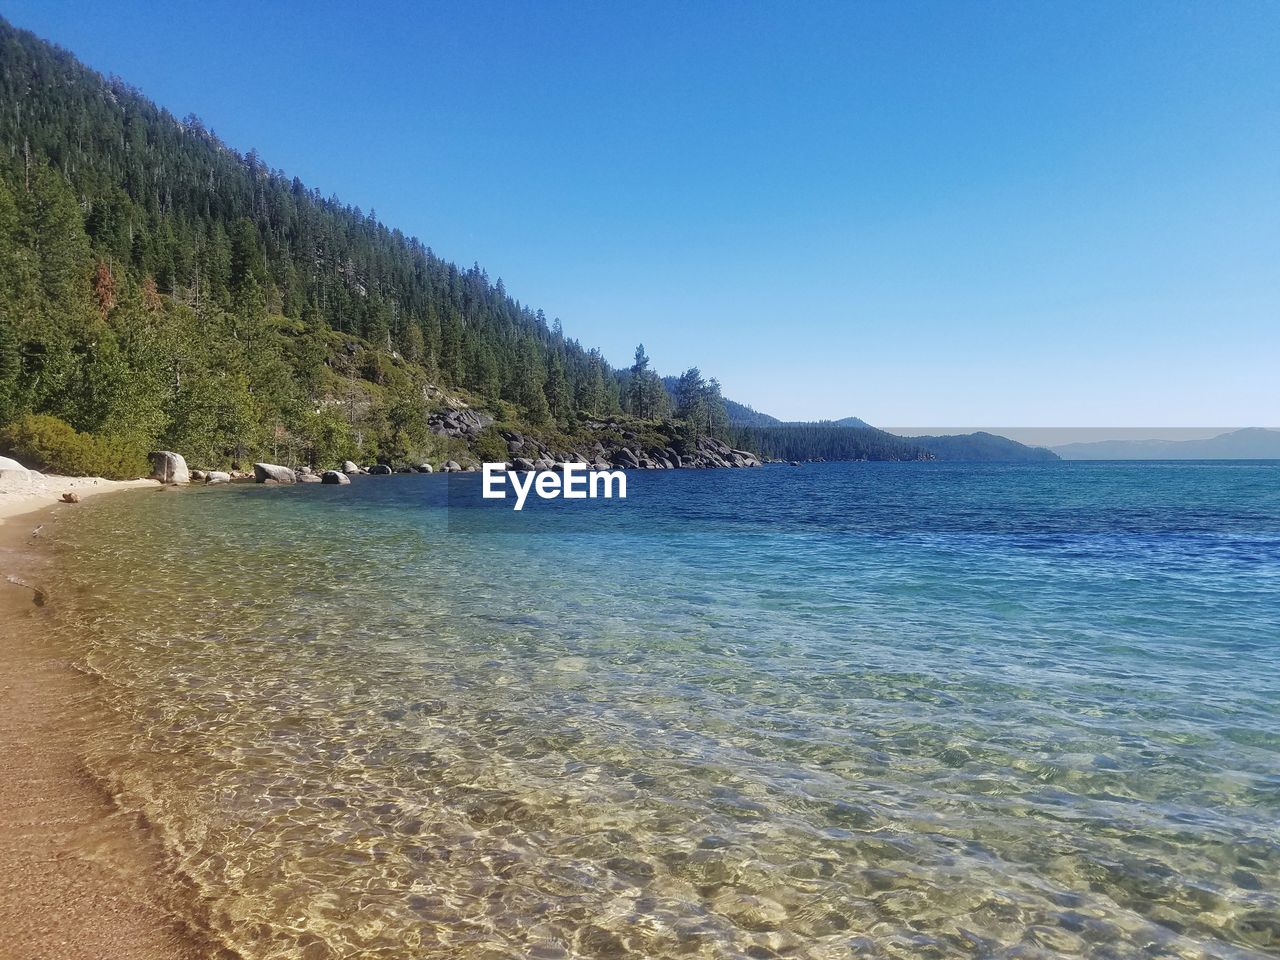 A view of lake tahoe from secret beach